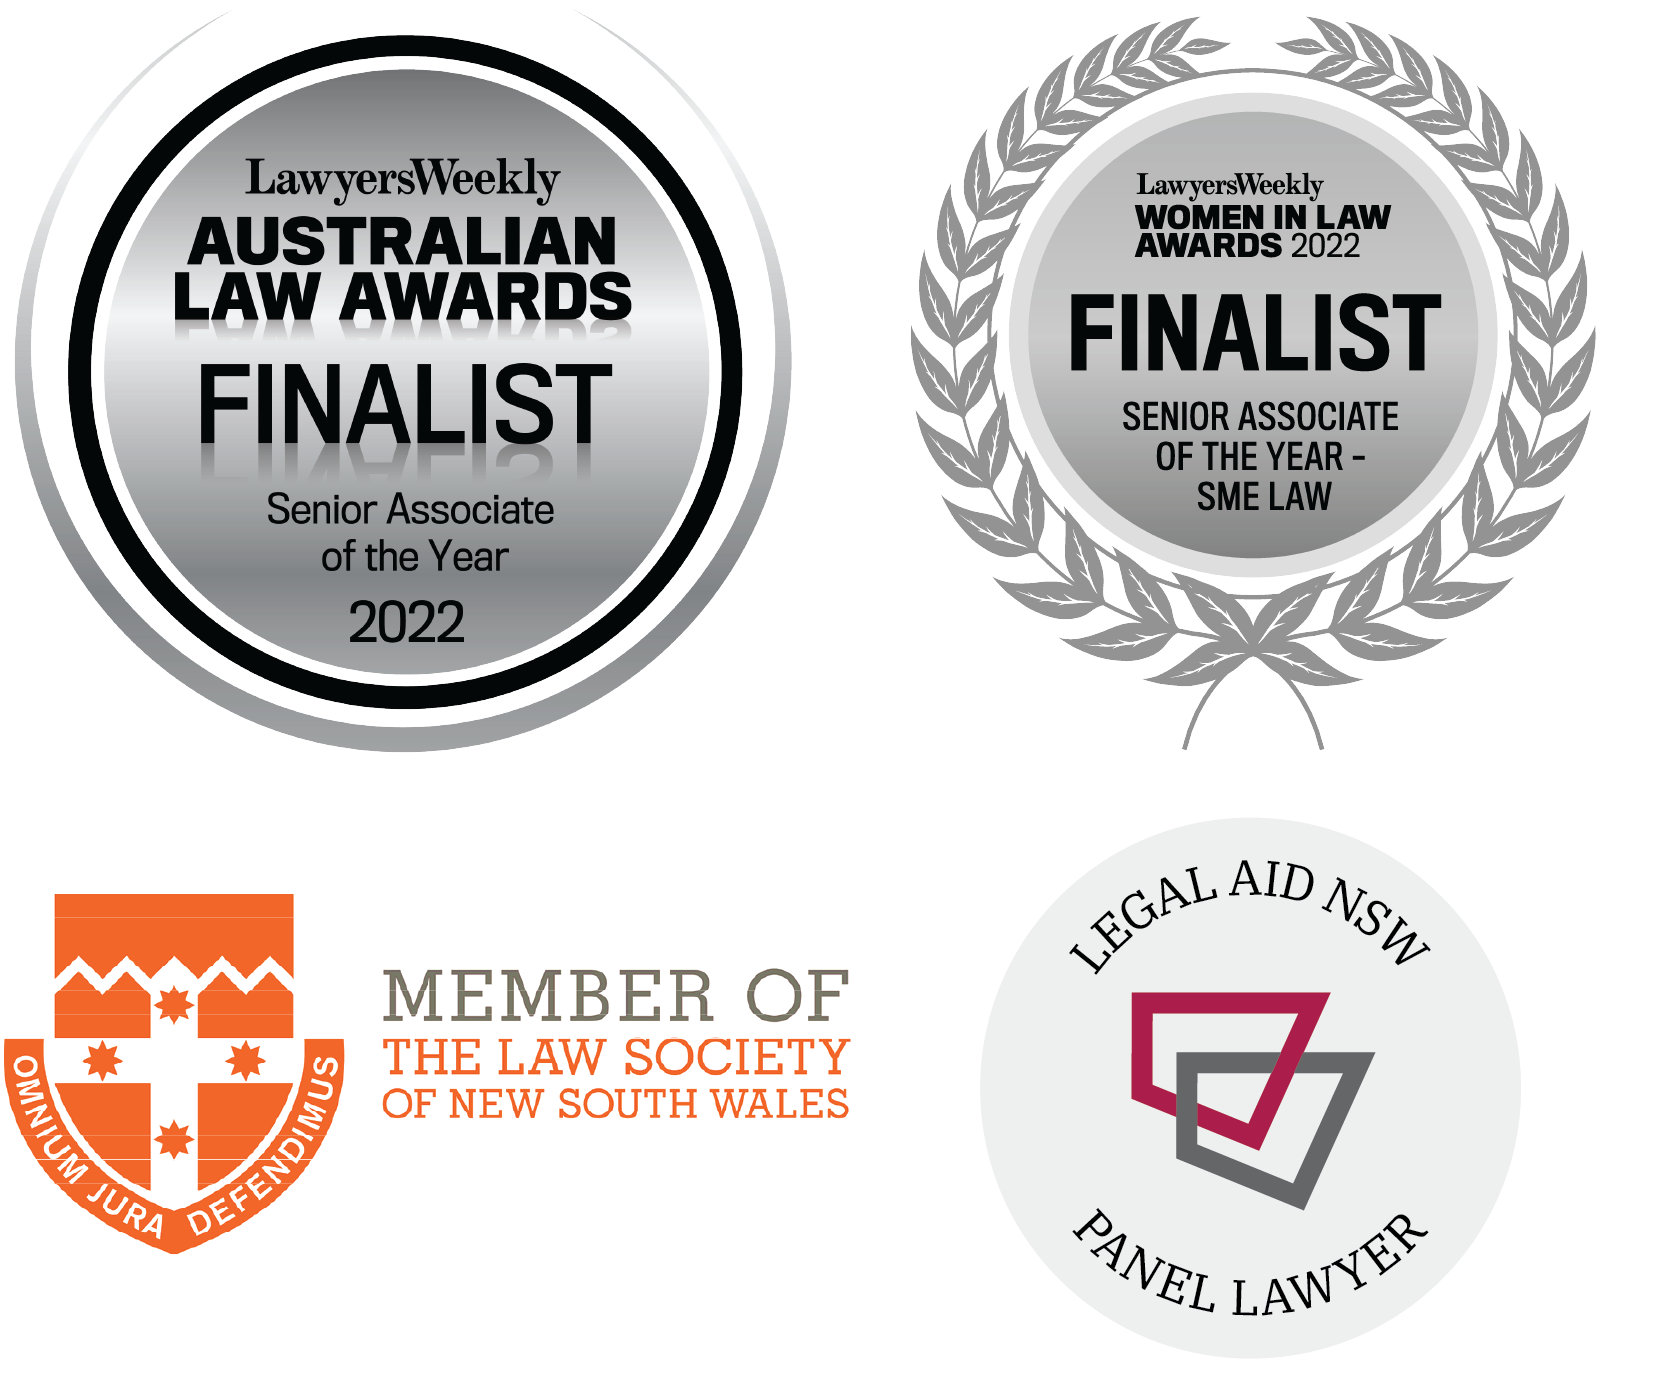 Finalist law awards from the Lawyers Weekly, Australian Law Awards, Women In Law Awards 2022, member of the Law Society of New South Wales and Legal Aid NSW, Panel Lawyer.